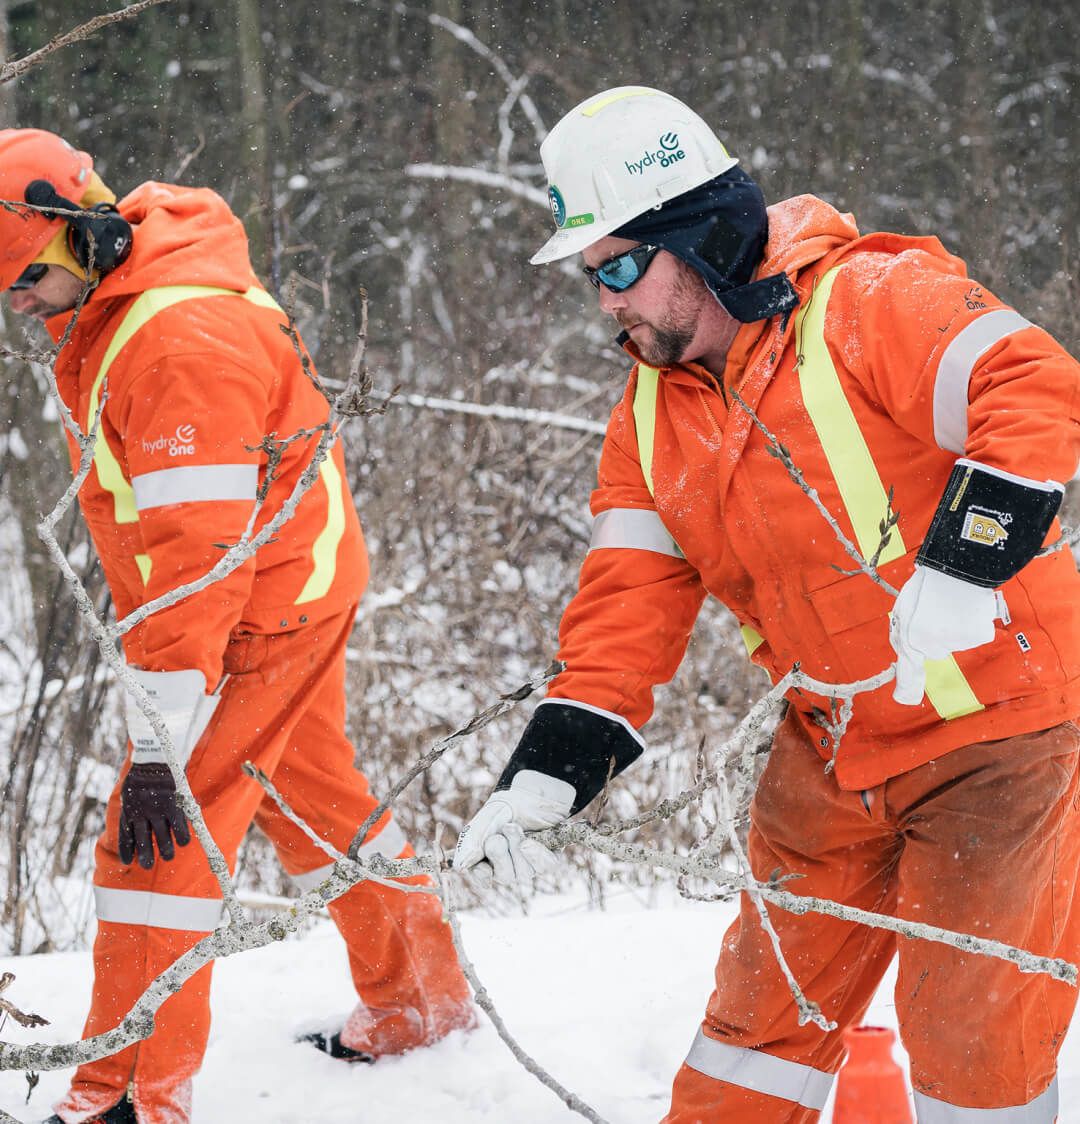 Hydro one employees cleaning up during the winter